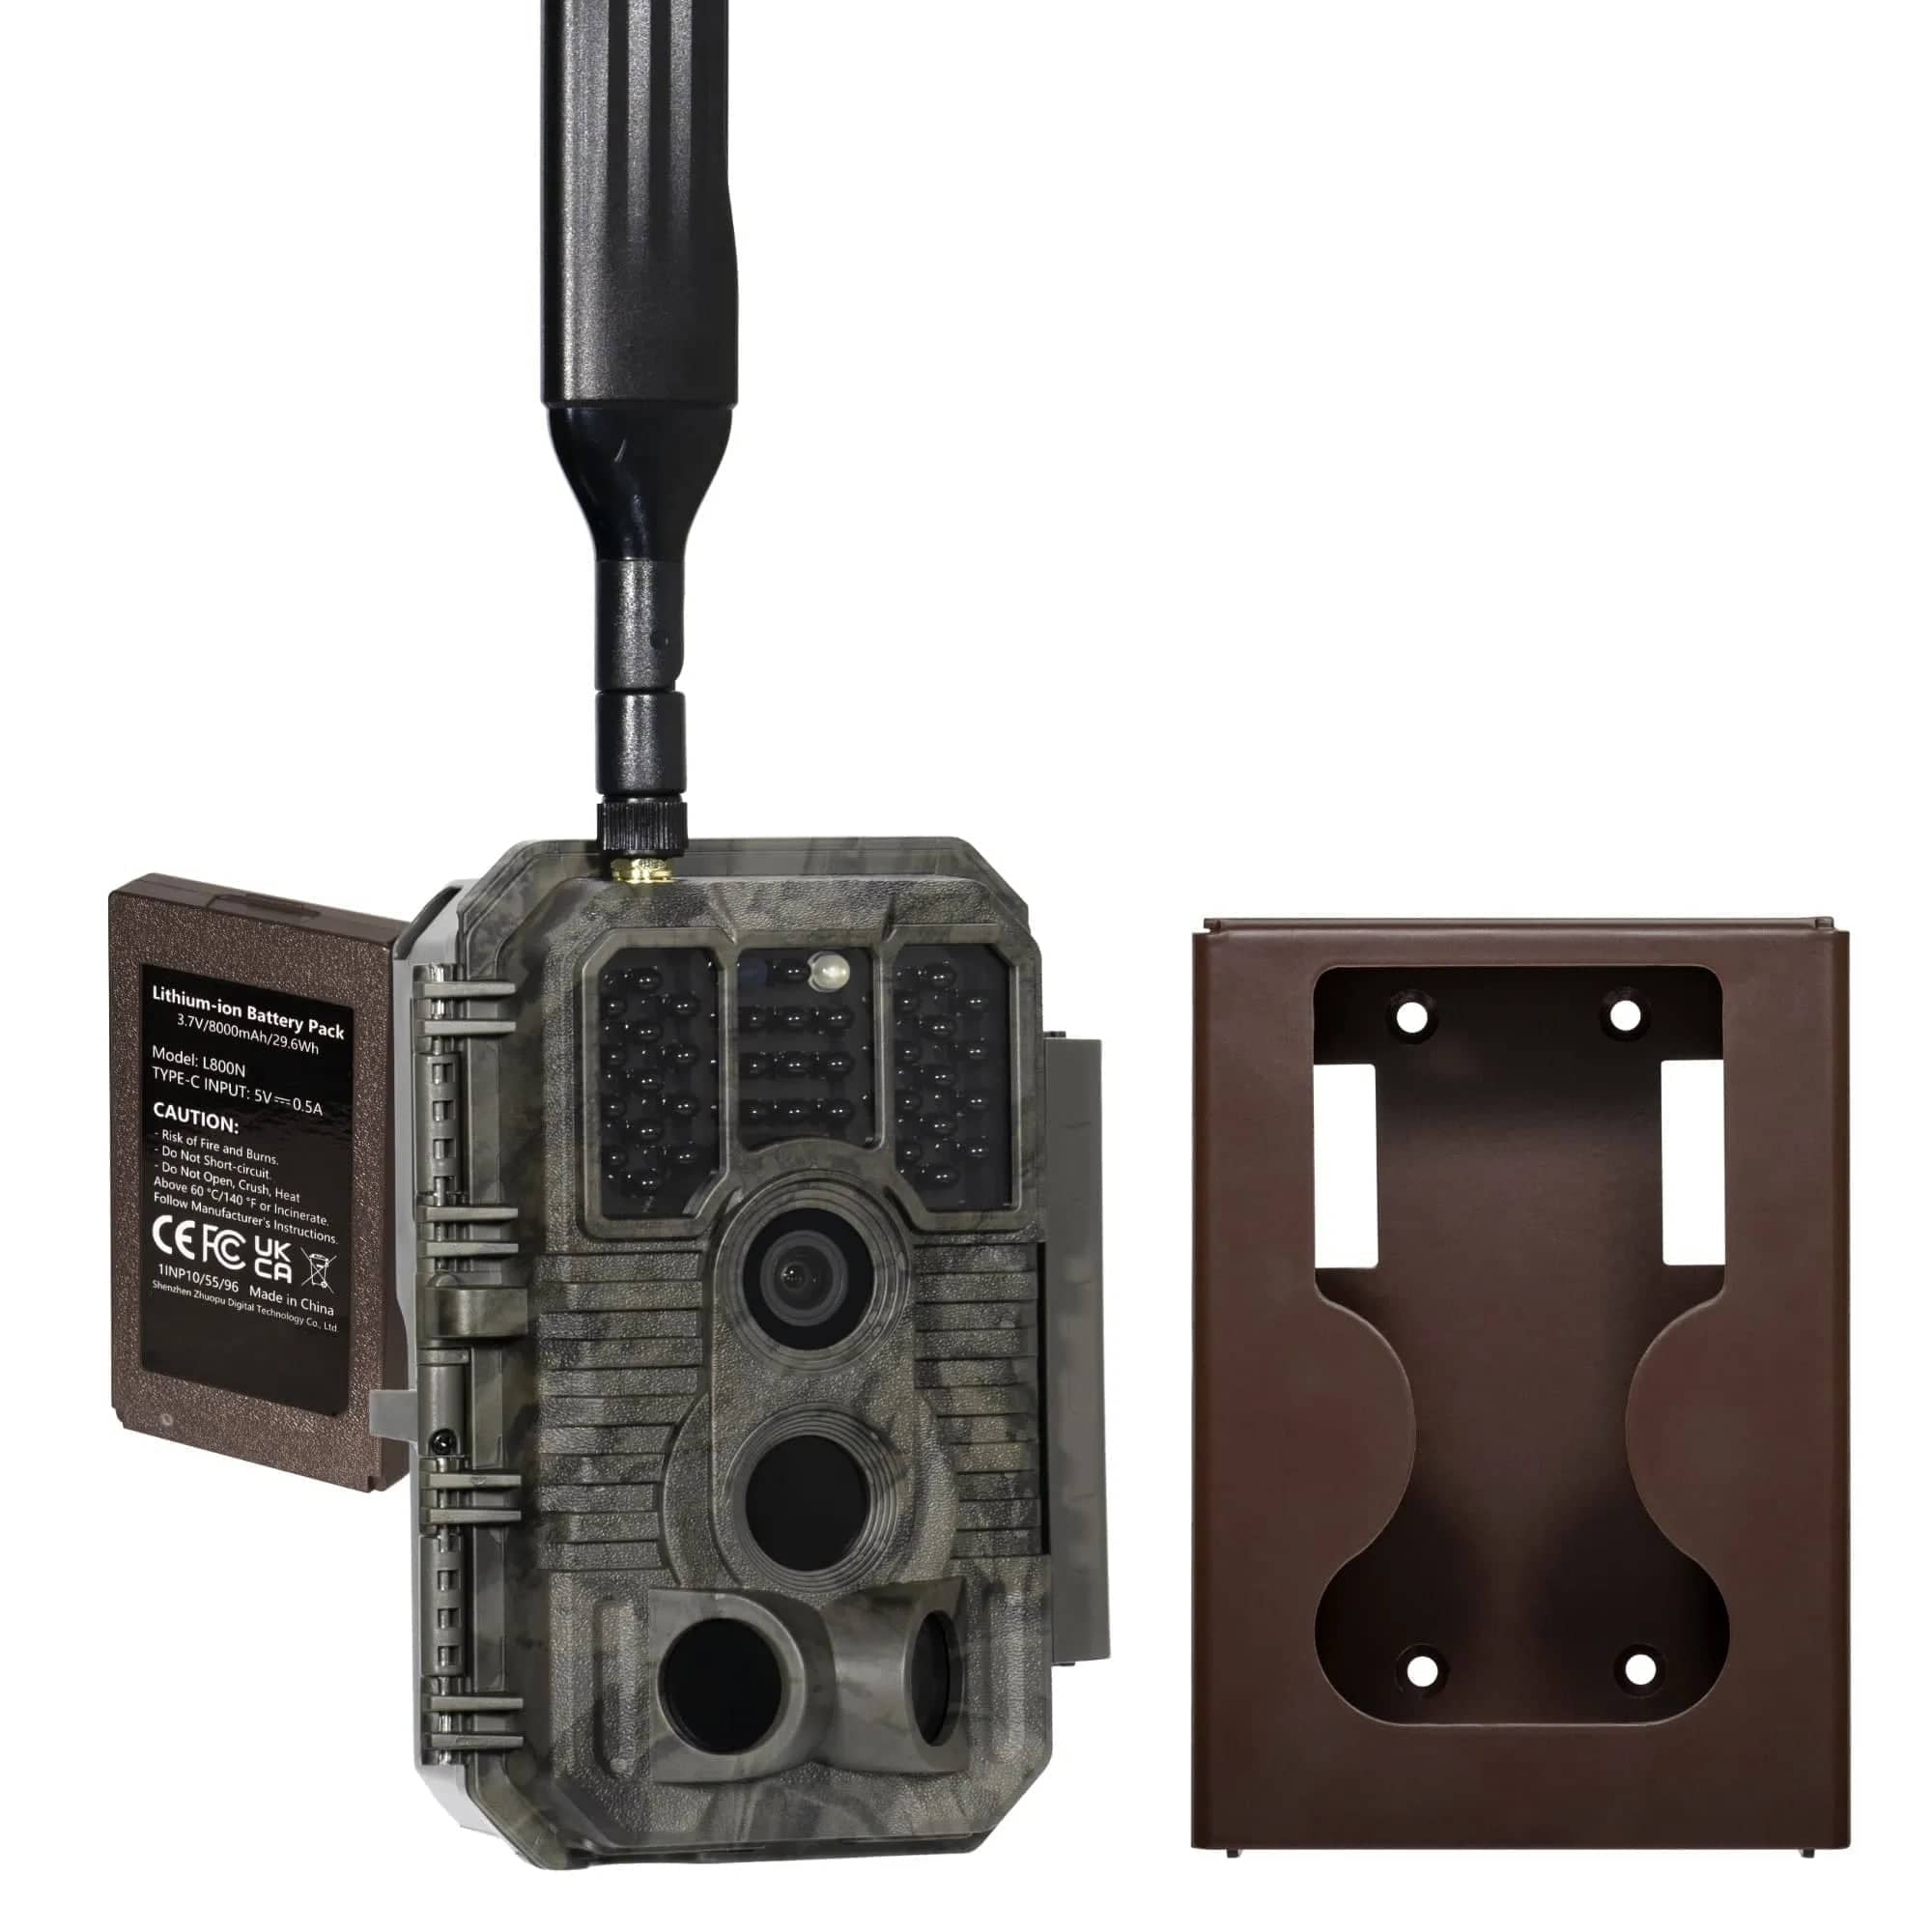 GardePro Cellular Trail Camera X60P Pre-Installed Contract SIM With Rechargeable Battery